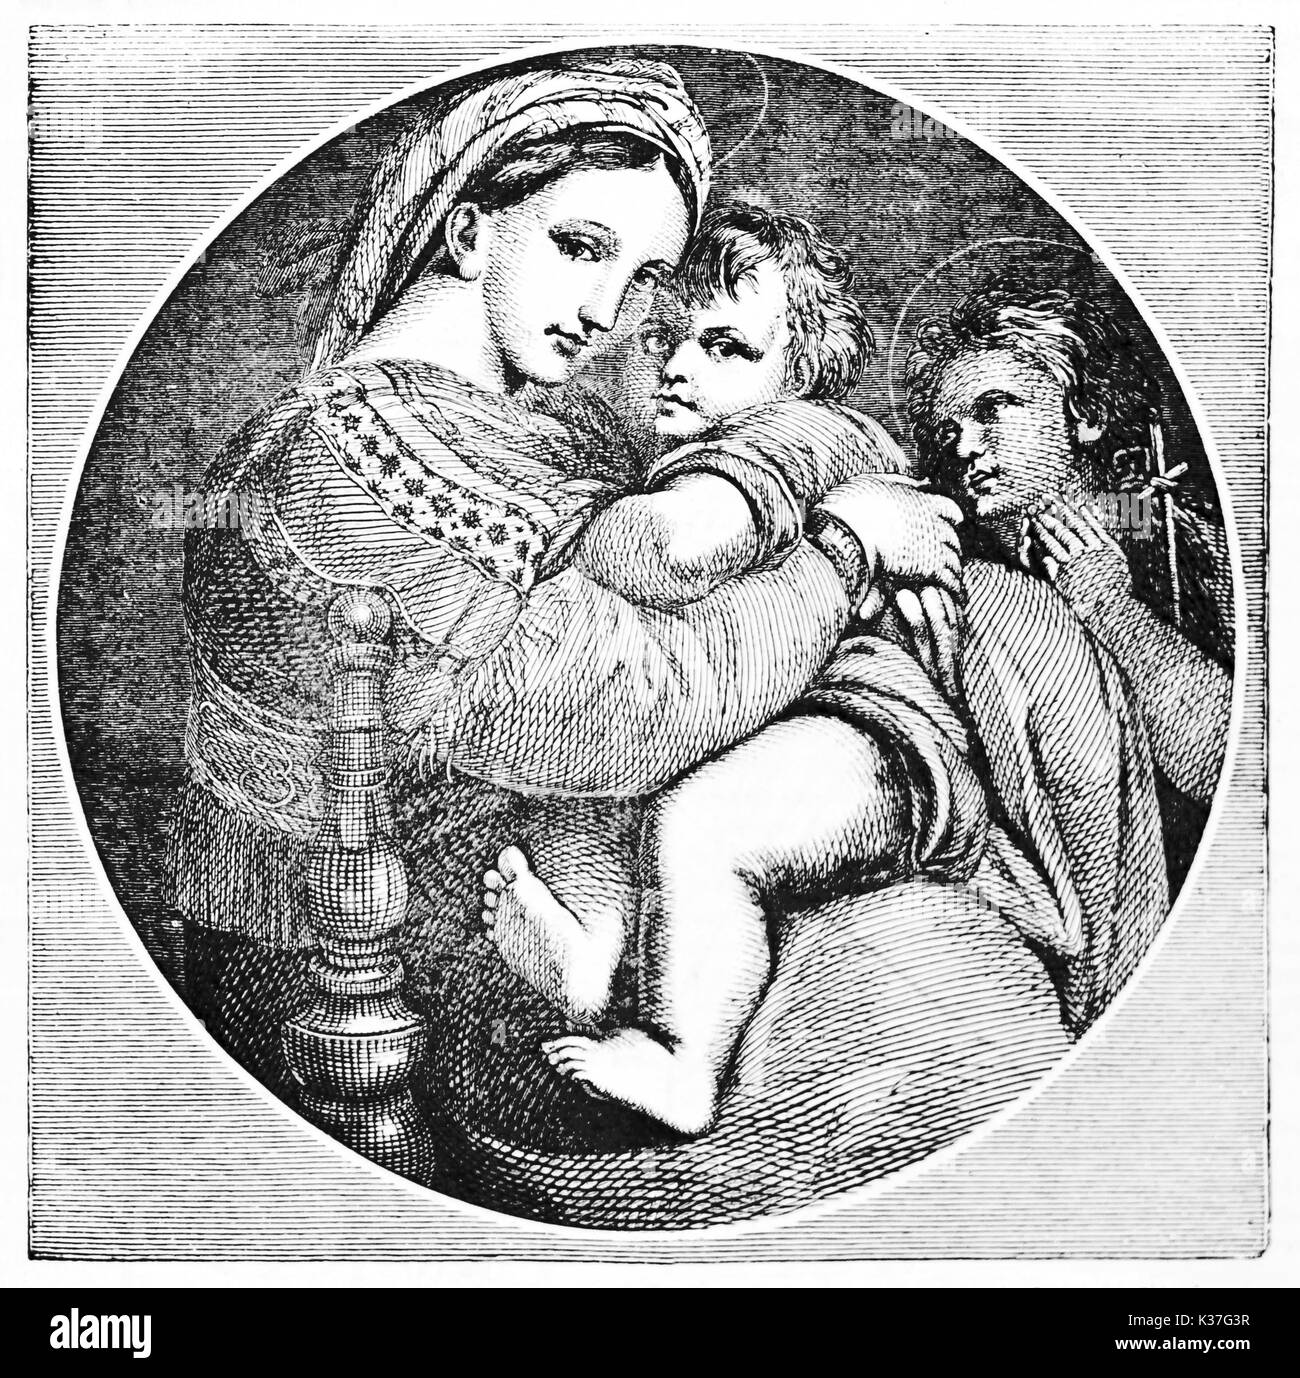 Raphael's picture Madonna della Seggiola (Virgin on chair) black and white reproduction. Created Old Illustration by Morghen and Jackson after Raphael, published on Magasin Pittoresque, Paris, 1834 Stock Photo